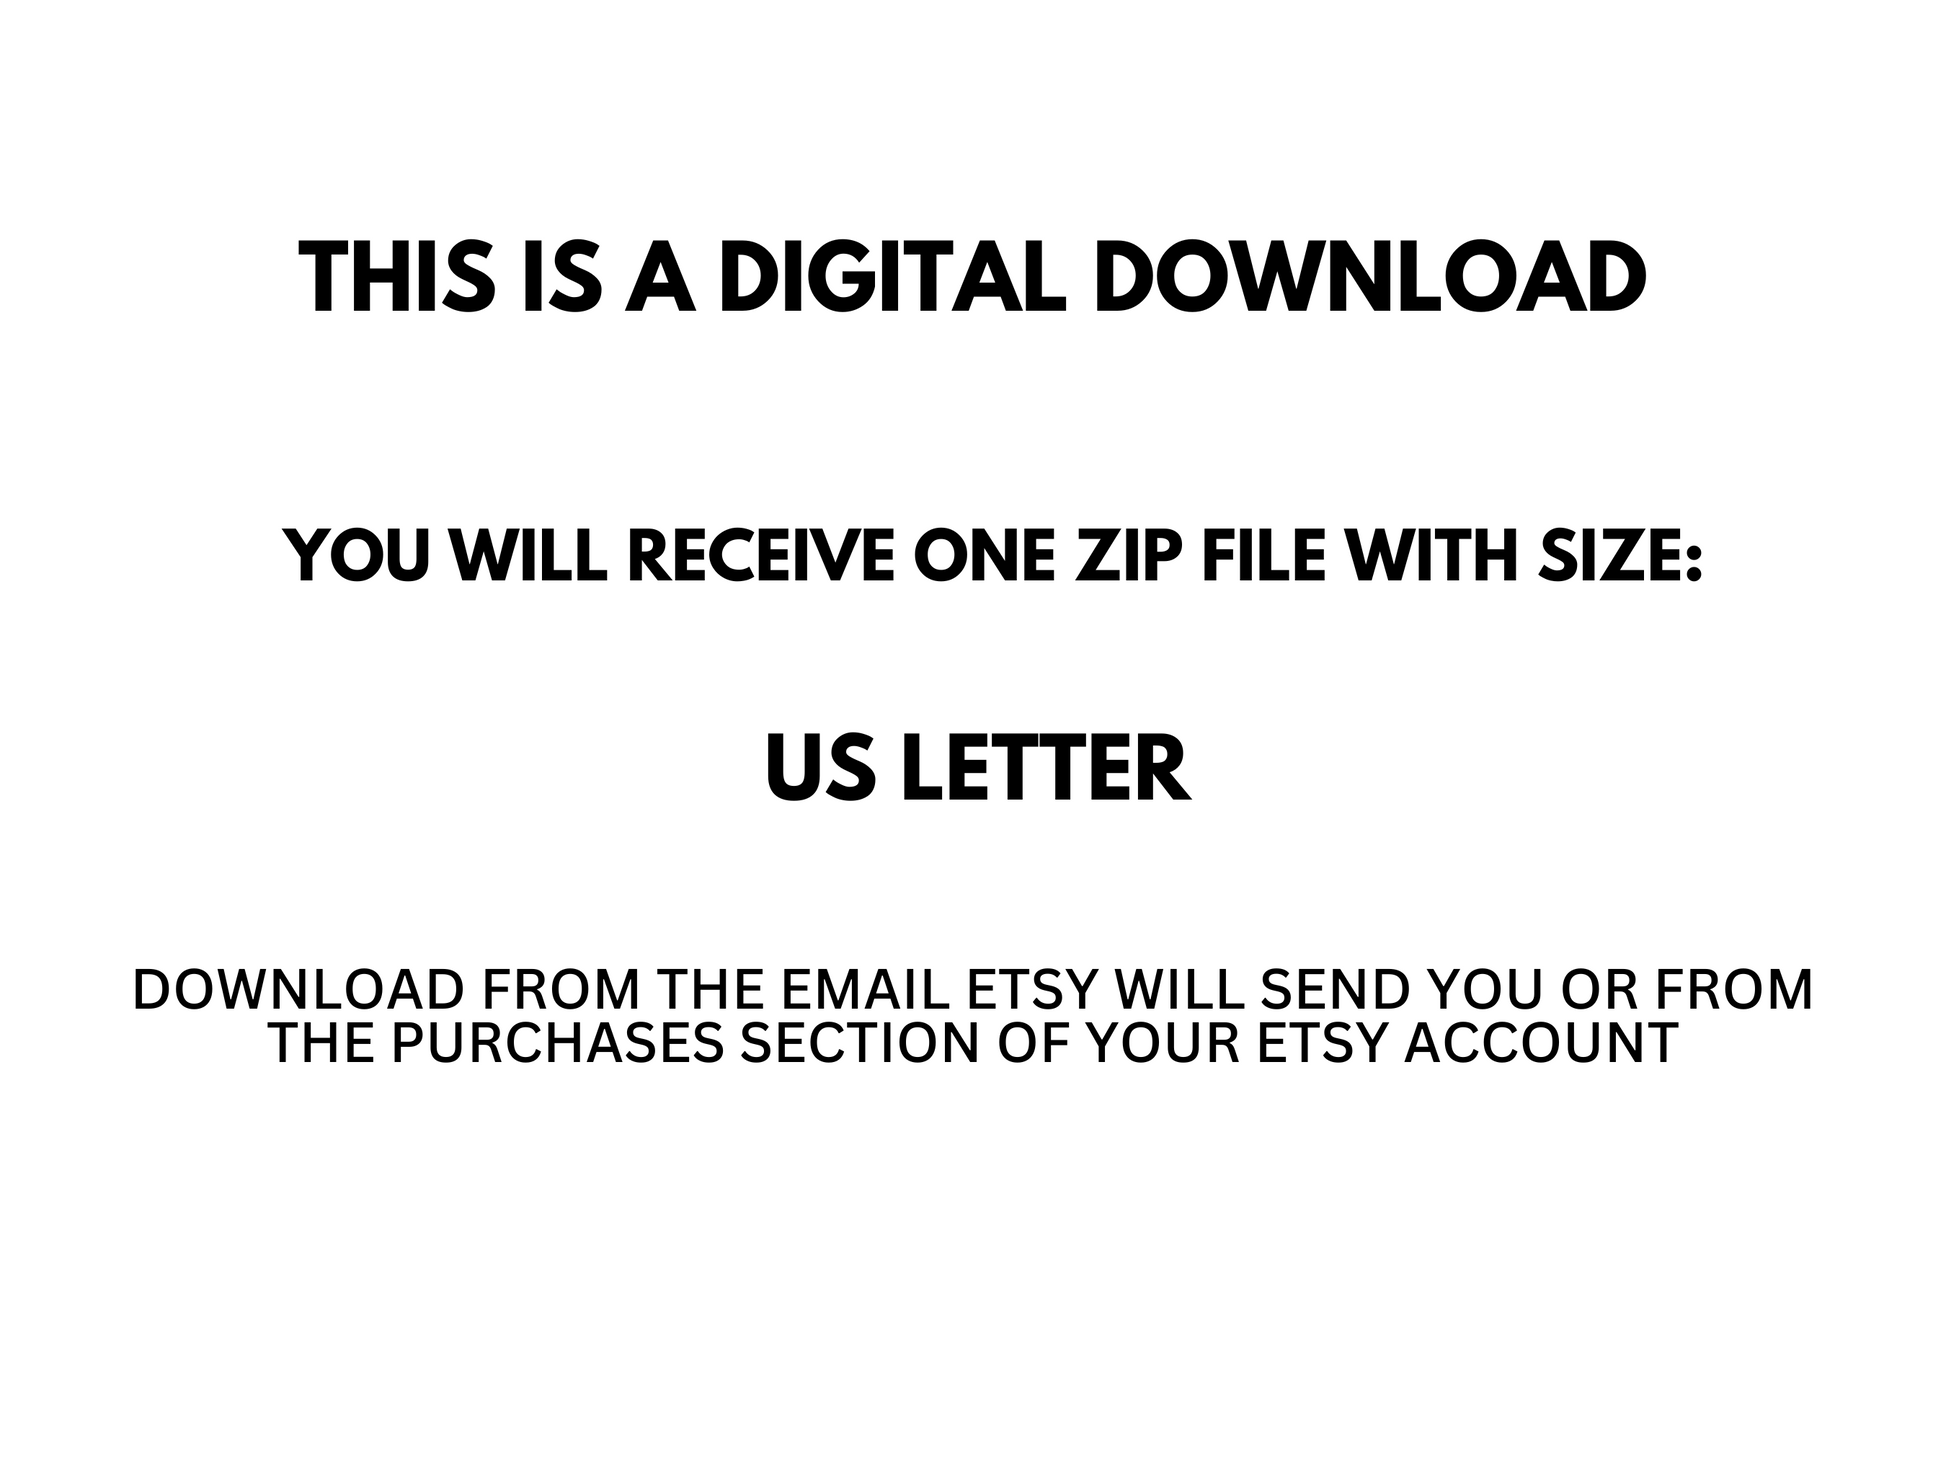 A statement explaining the product is a digital download.